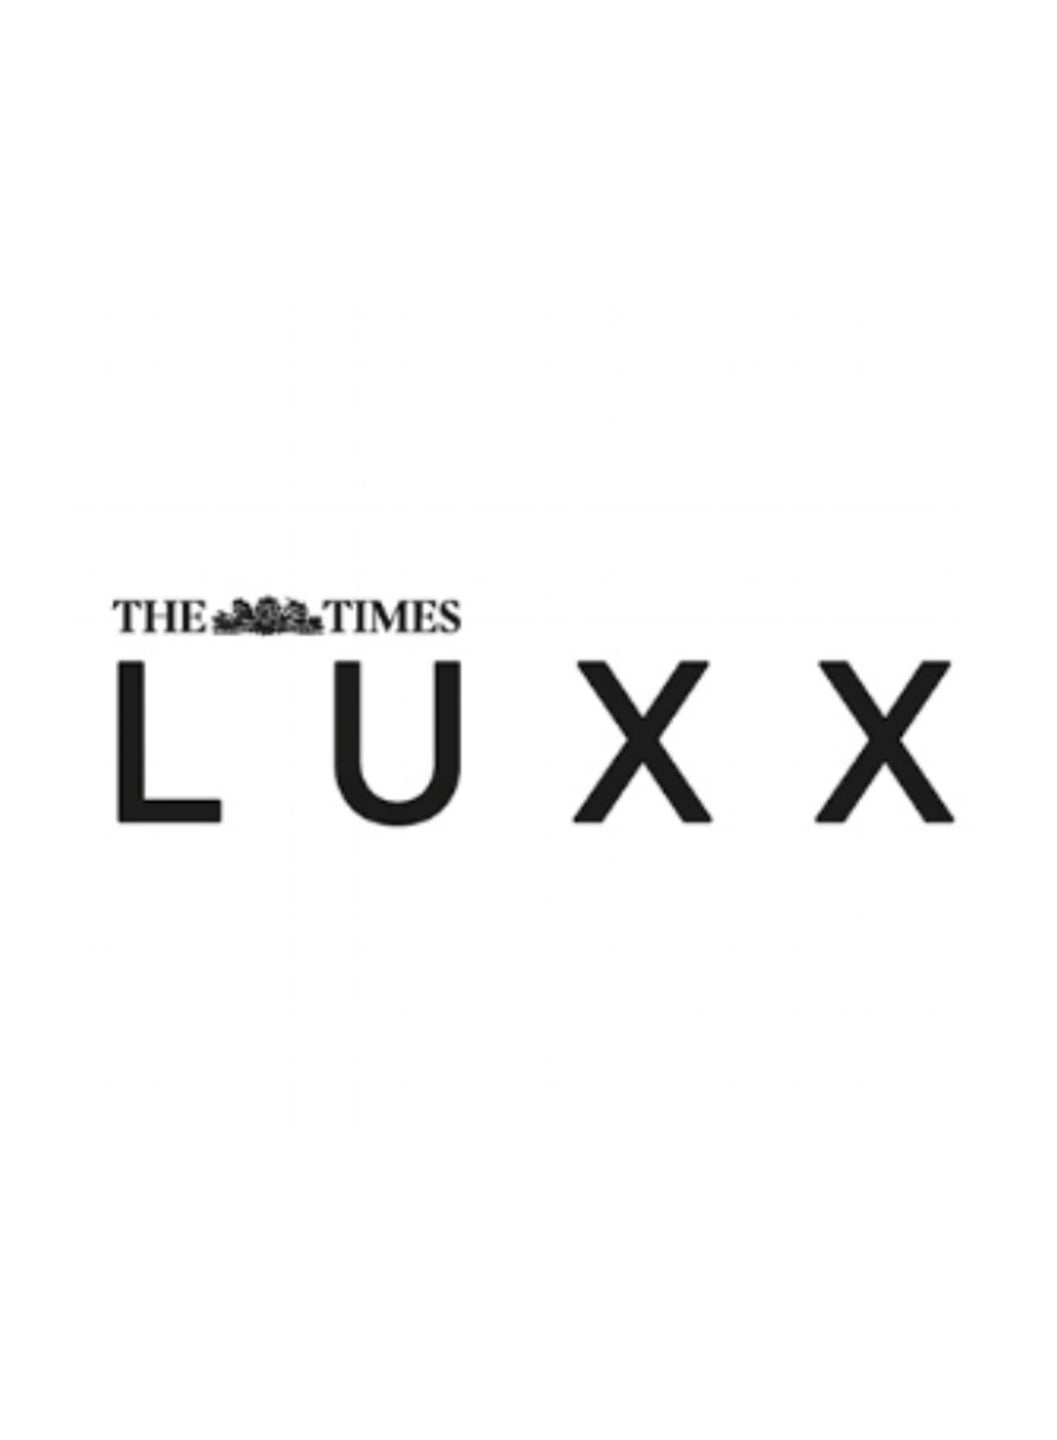 The Times LUXX